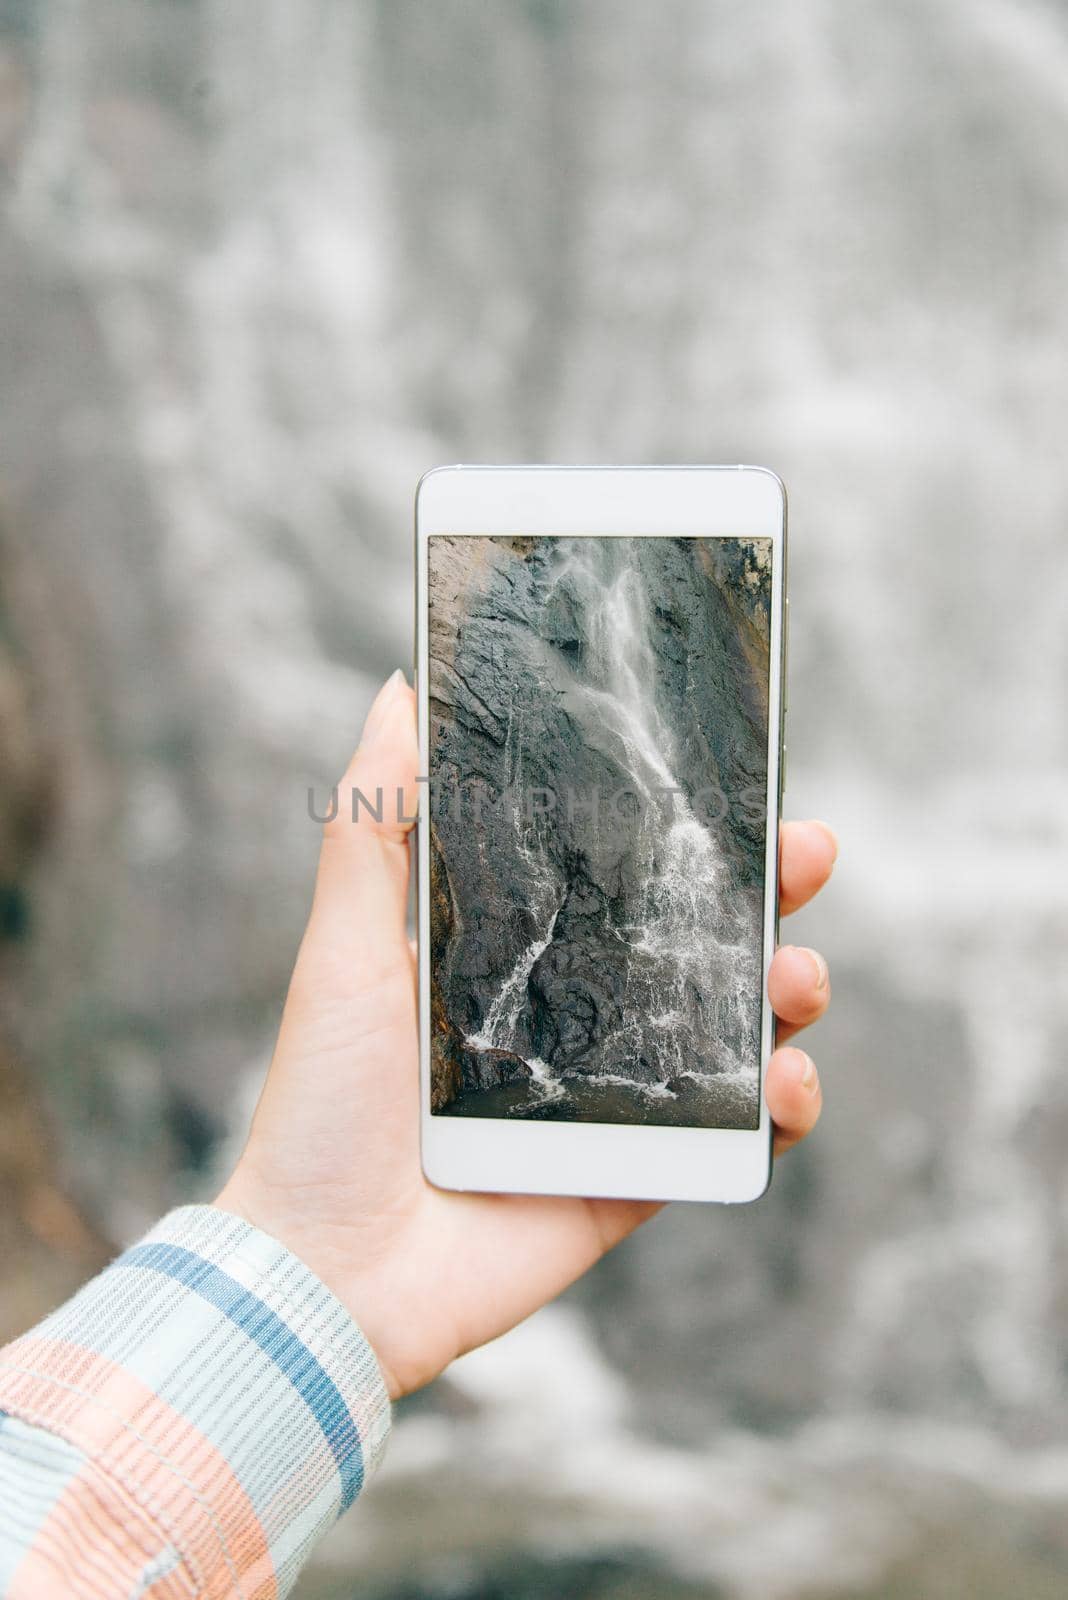 Woman taking photo with smartphone the waterfall outdoor, view of hand, pov image.